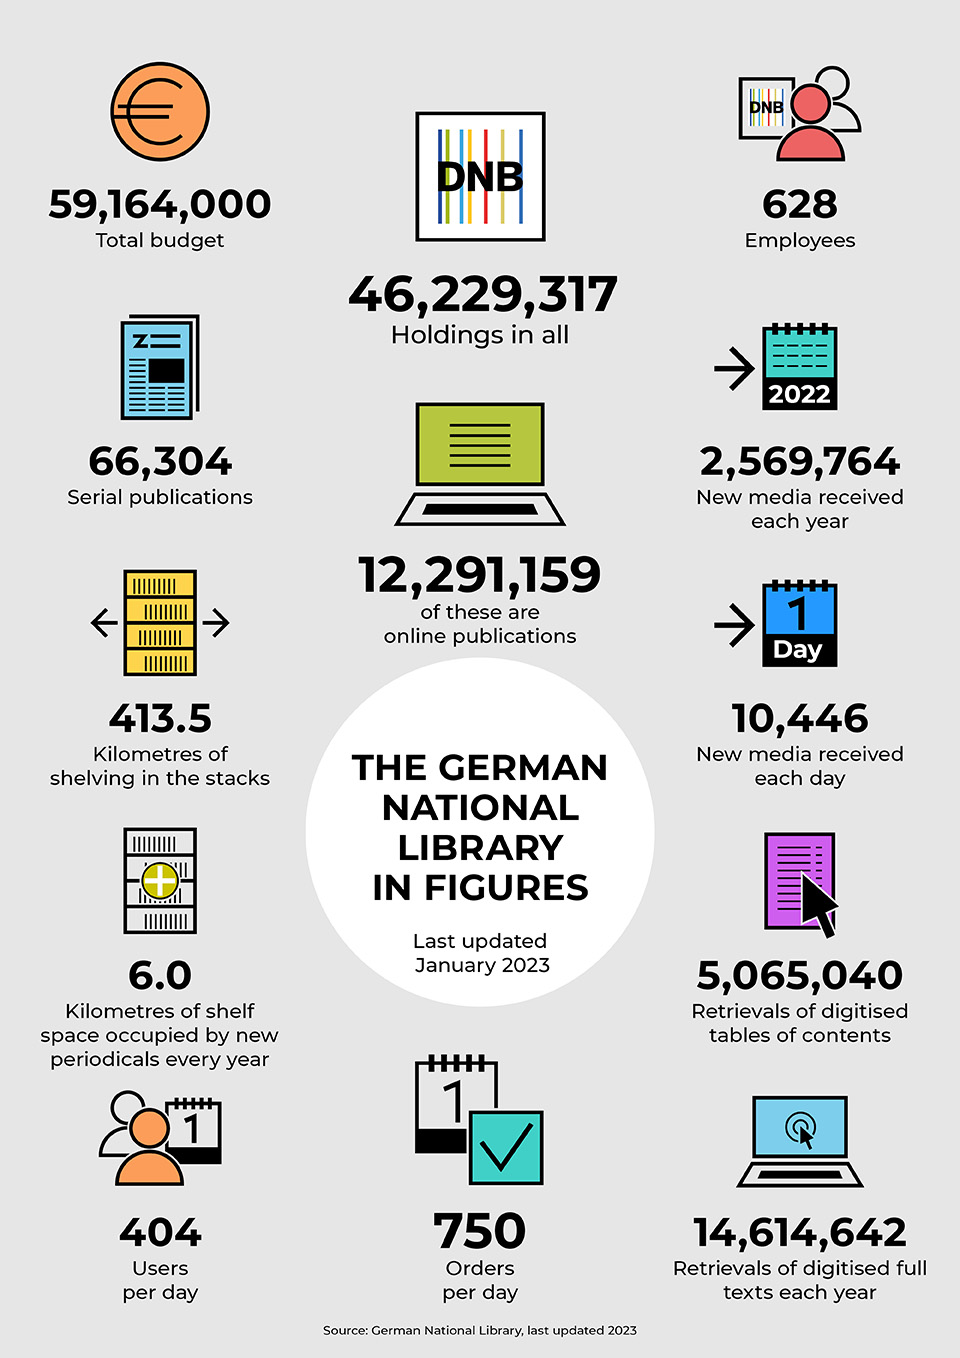 Infographic “The German National Library in figures” (last updated January 2023)